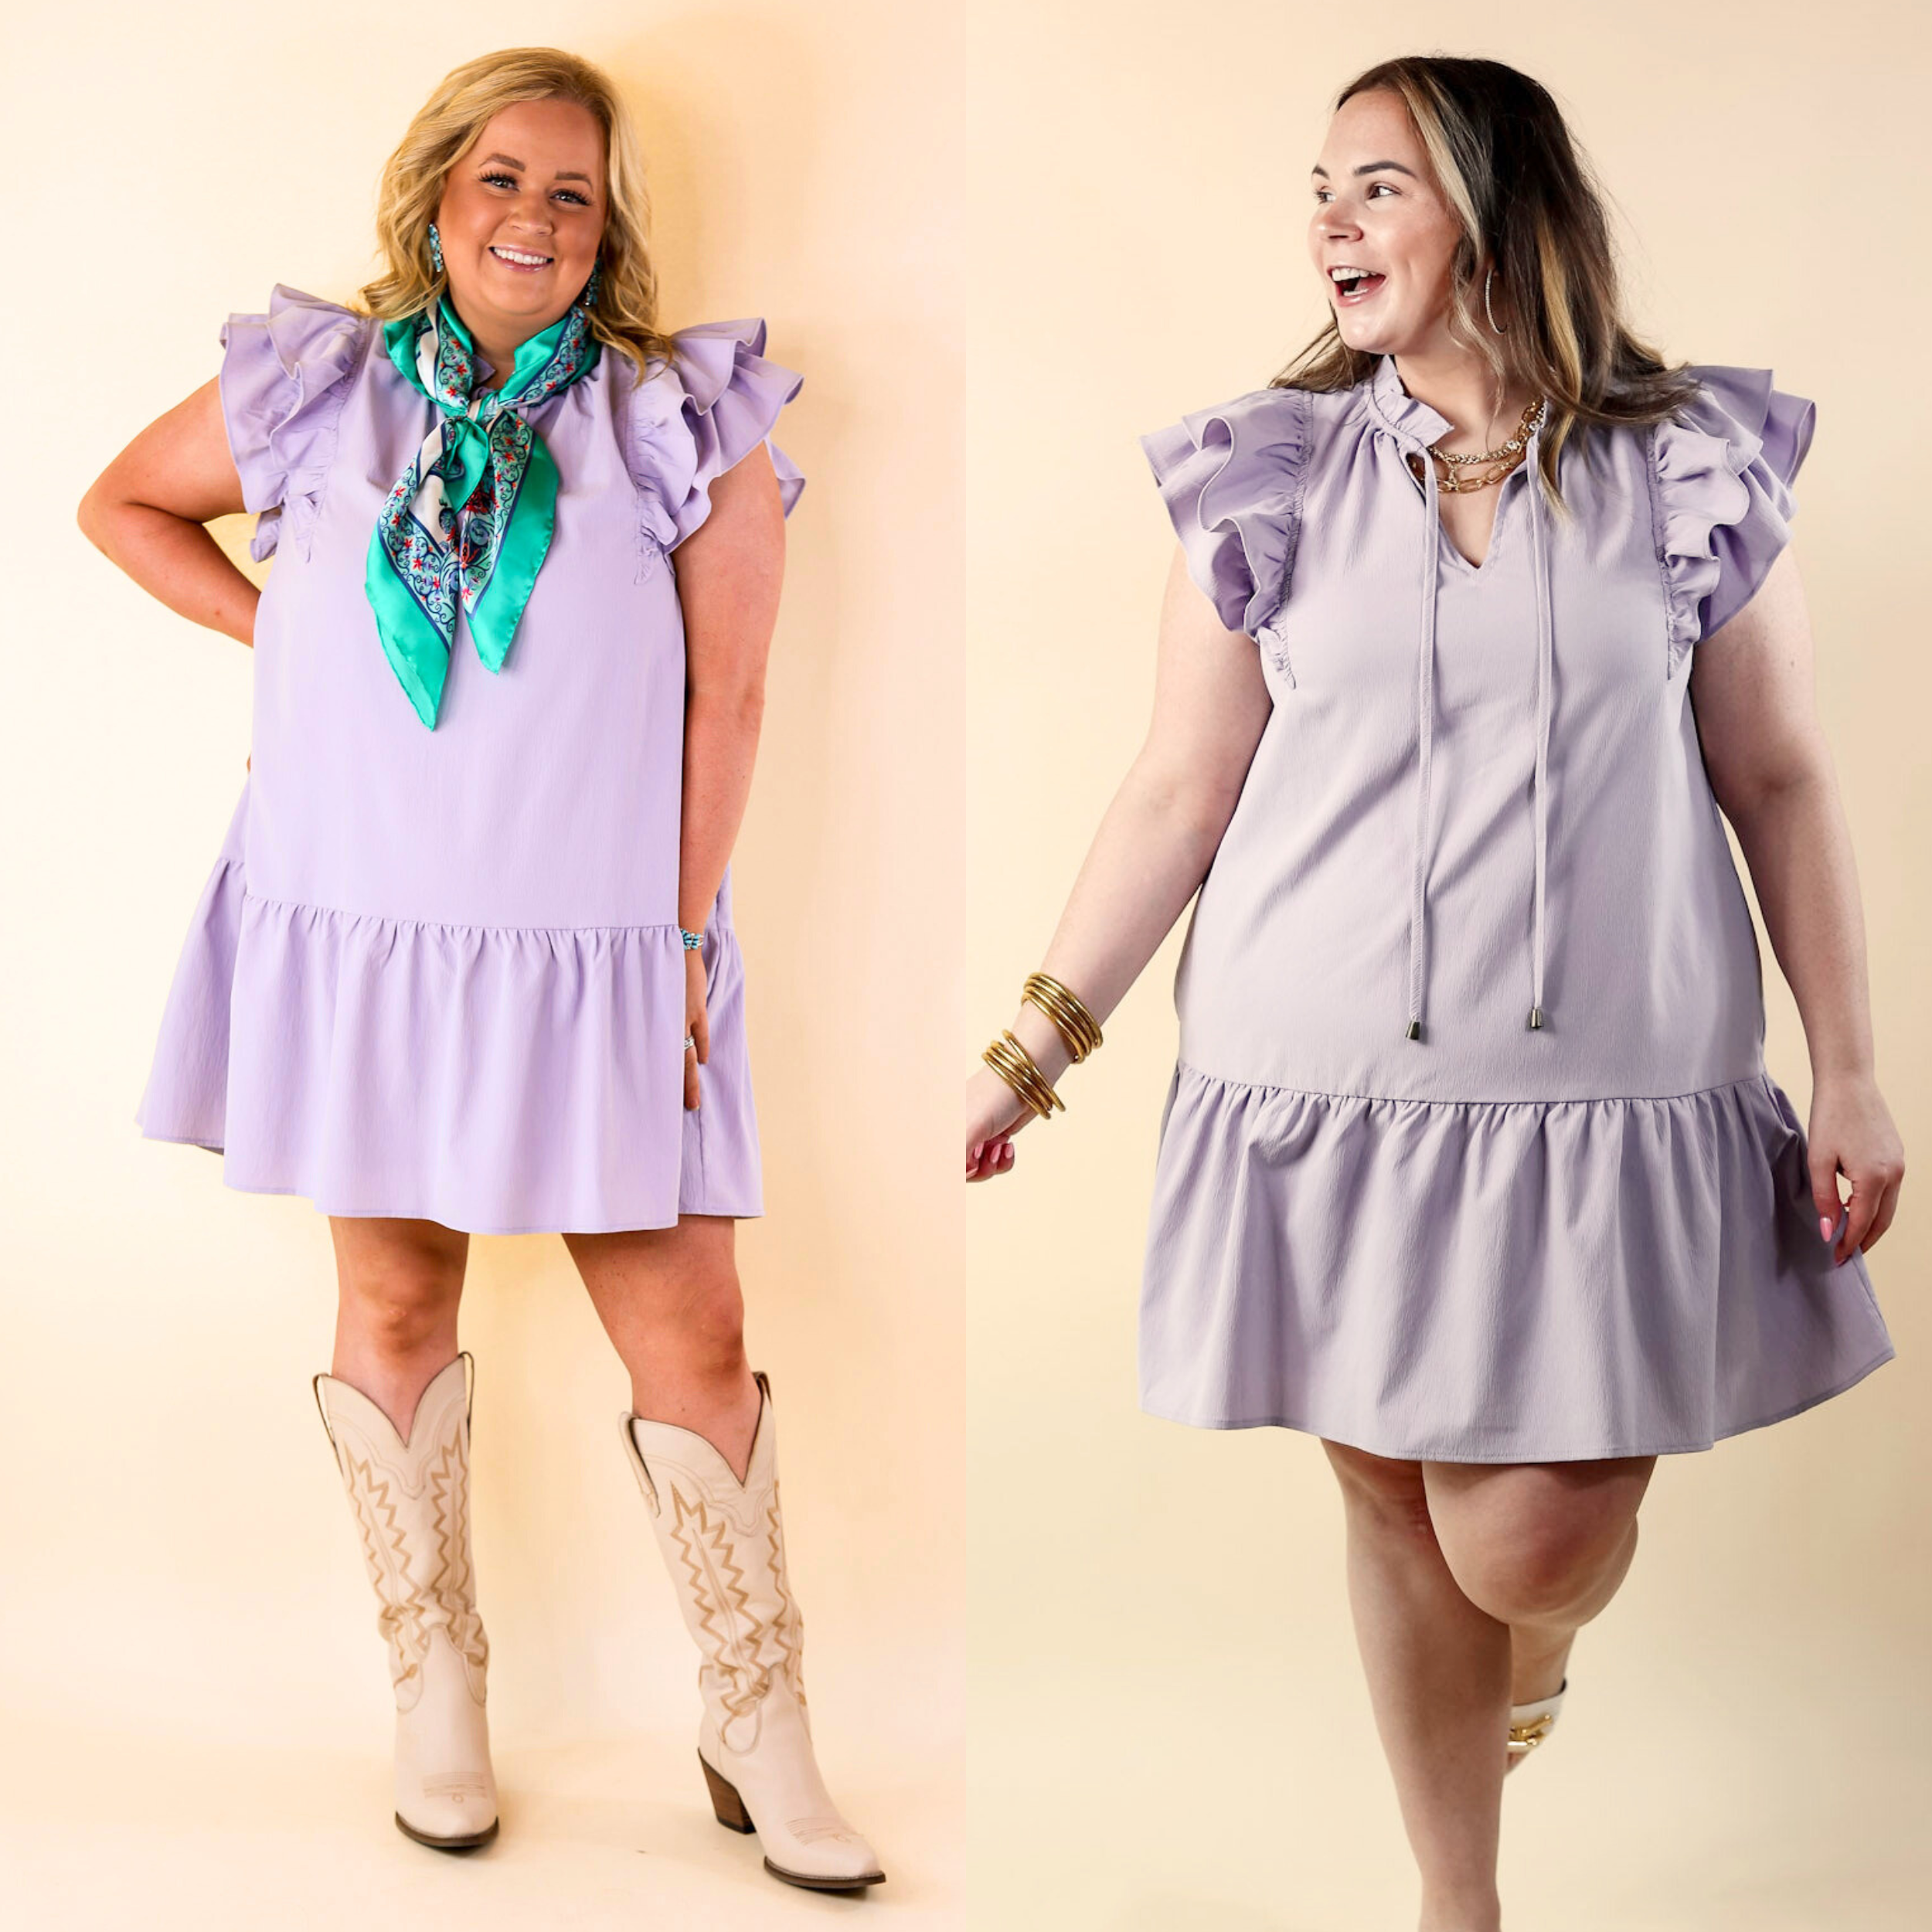 Powerful Love Ruffle Cap Sleeve Dress with Keyhole and Tie Neckline in Lavender Purple - Giddy Up Glamour Boutique